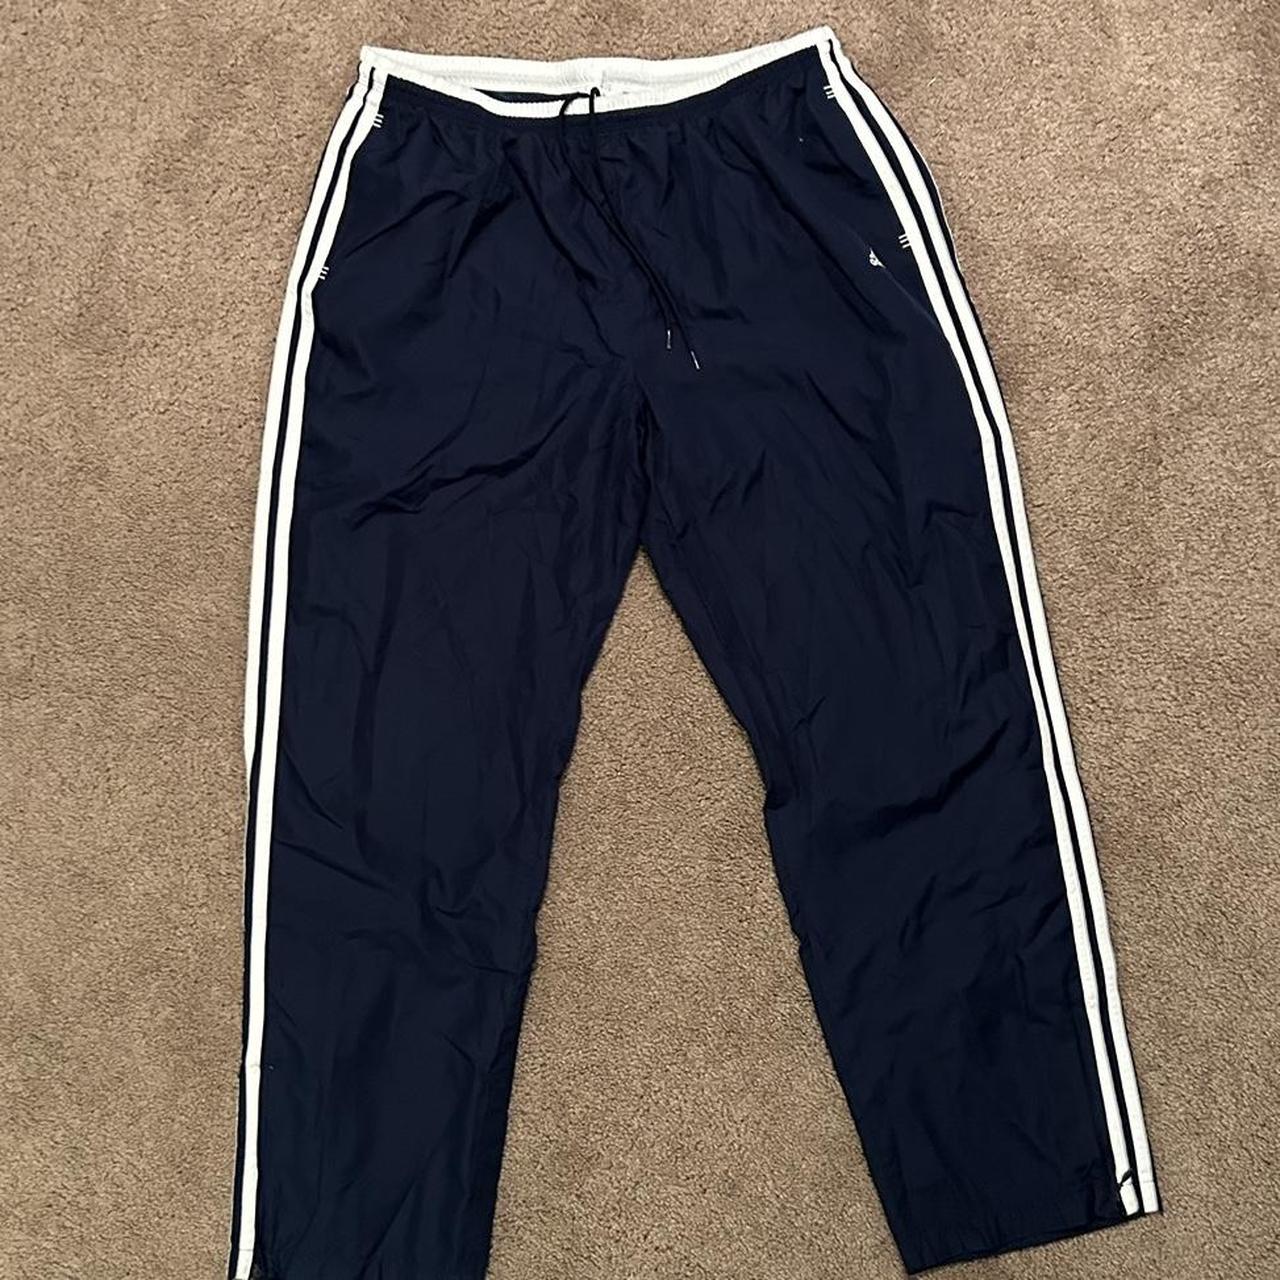 Adidas Men's Navy and White Joggers-tracksuits (2)